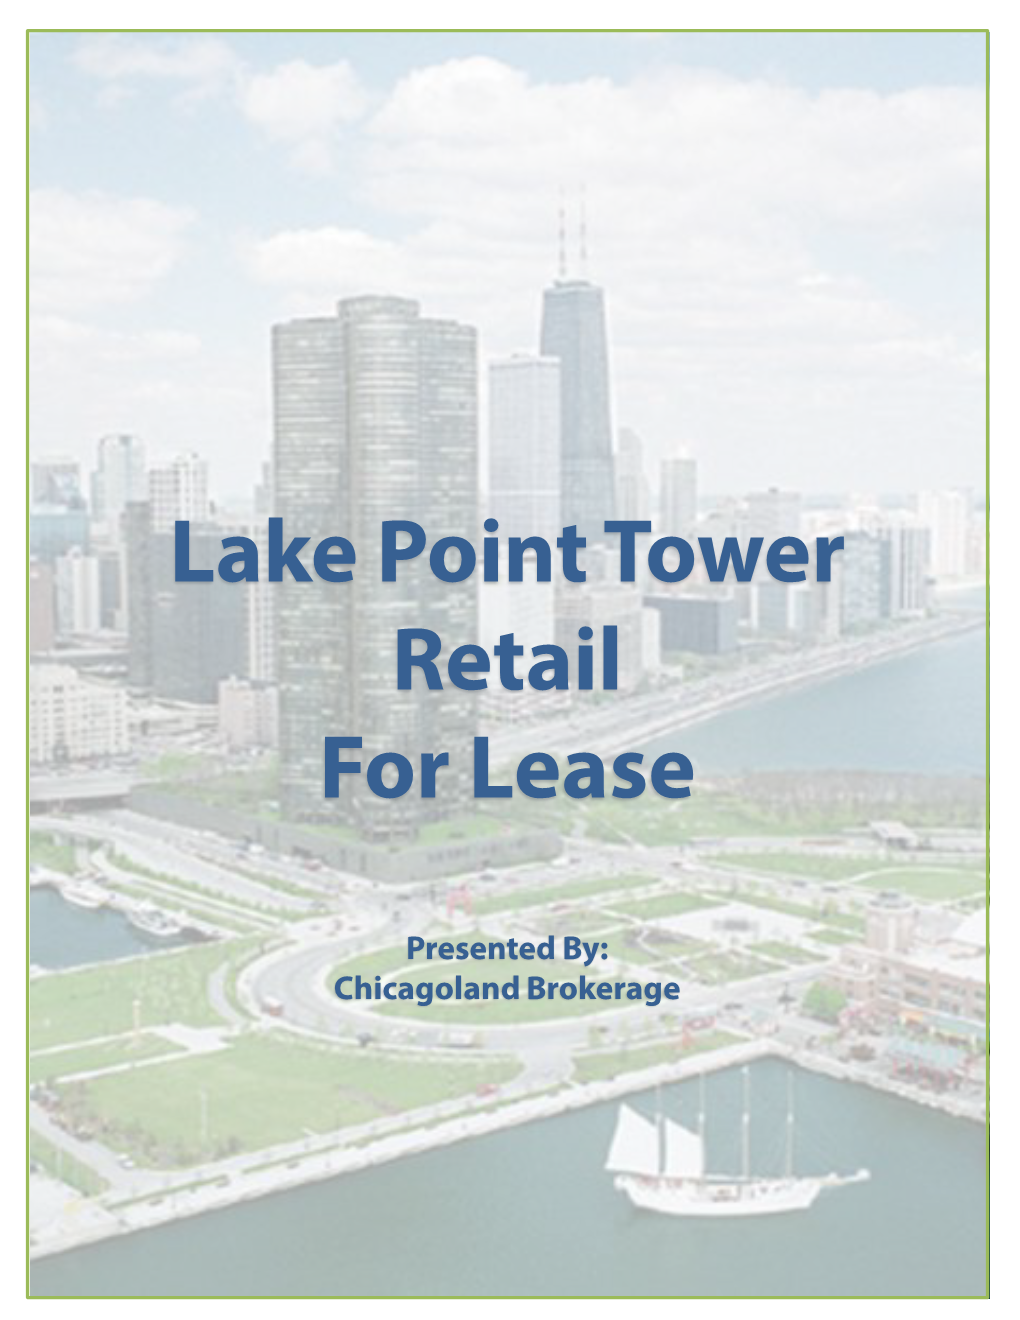 Lake Point Tower Retail for Lease